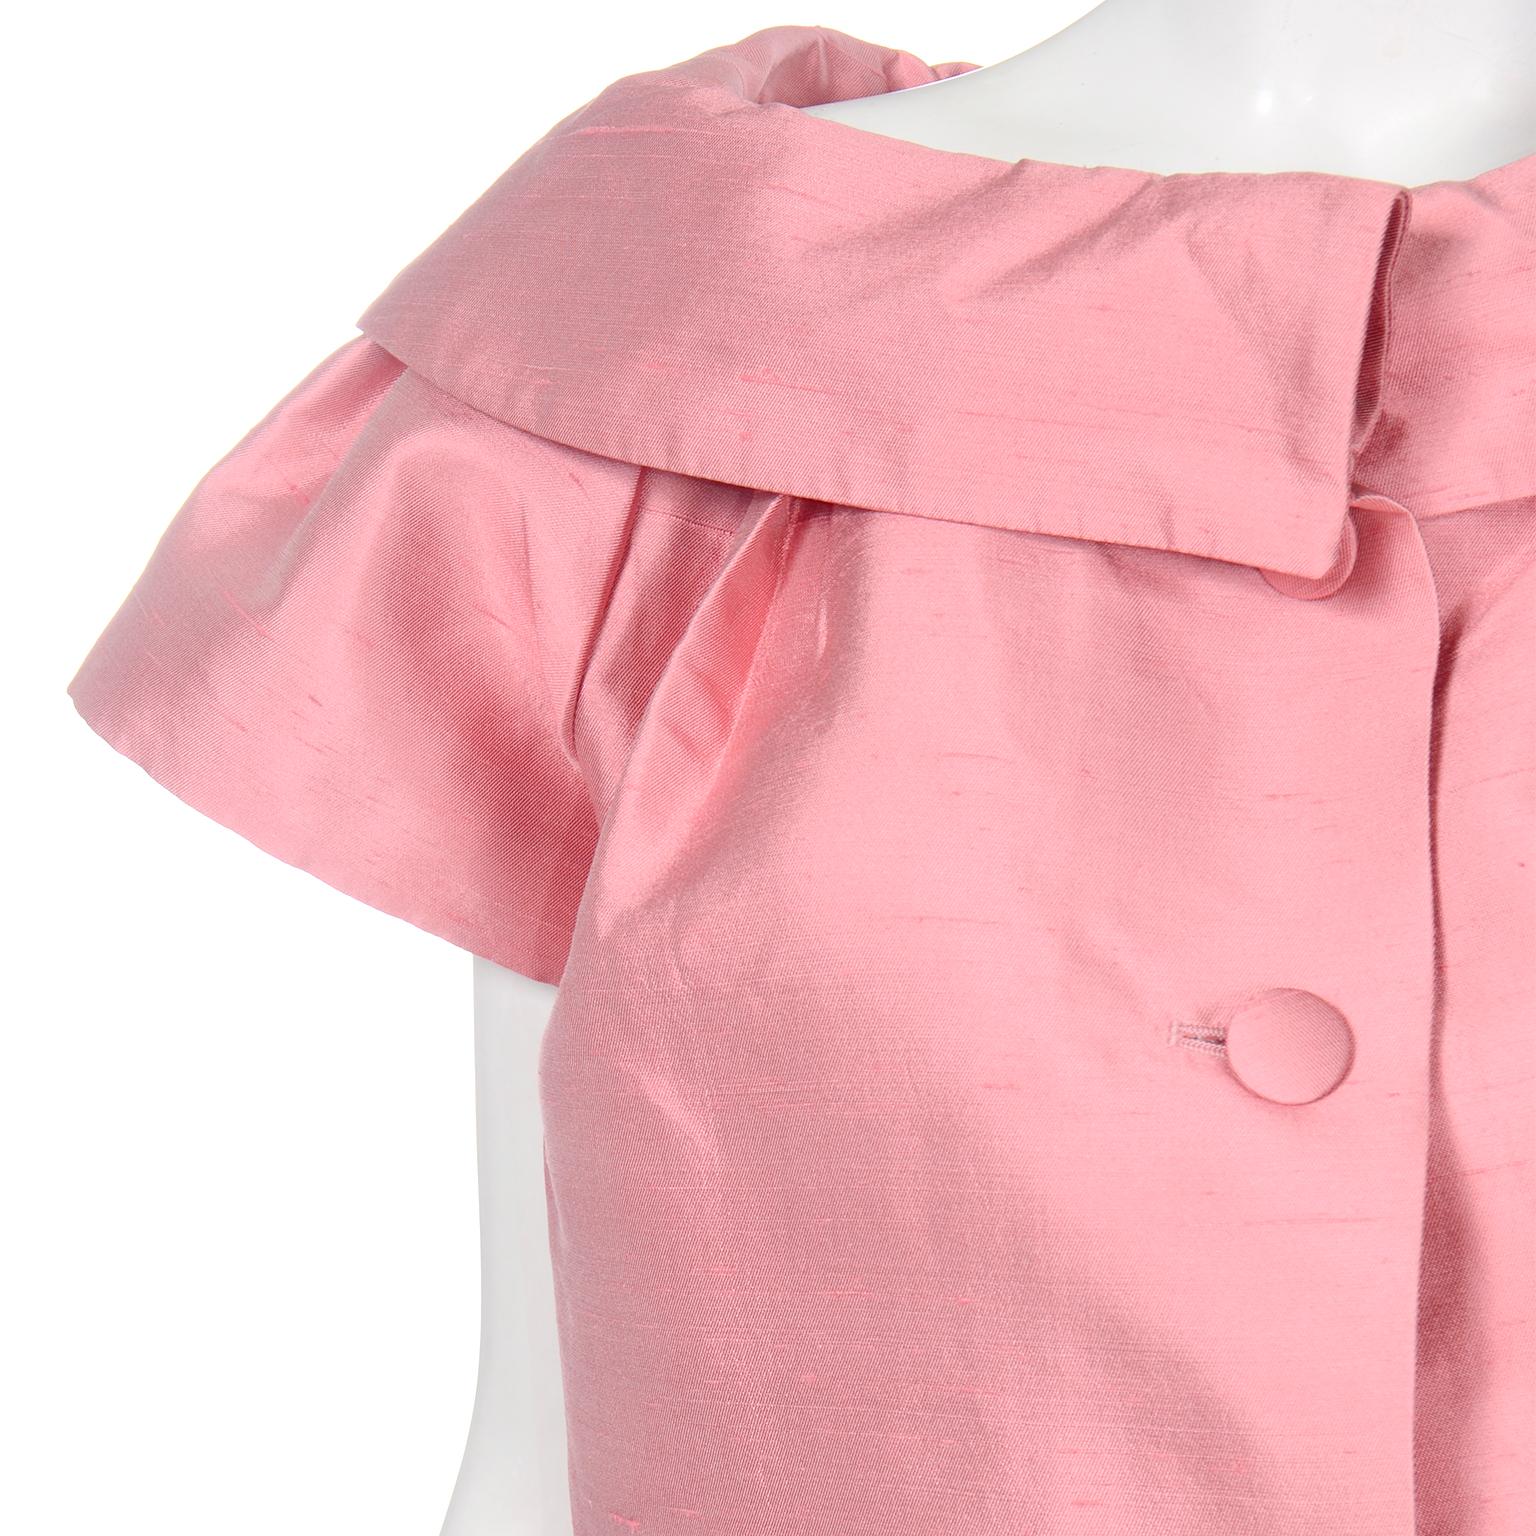 John Galliano for Christian Dior 1960s Inspired Pink 2008 Vintage Jacket Top 5